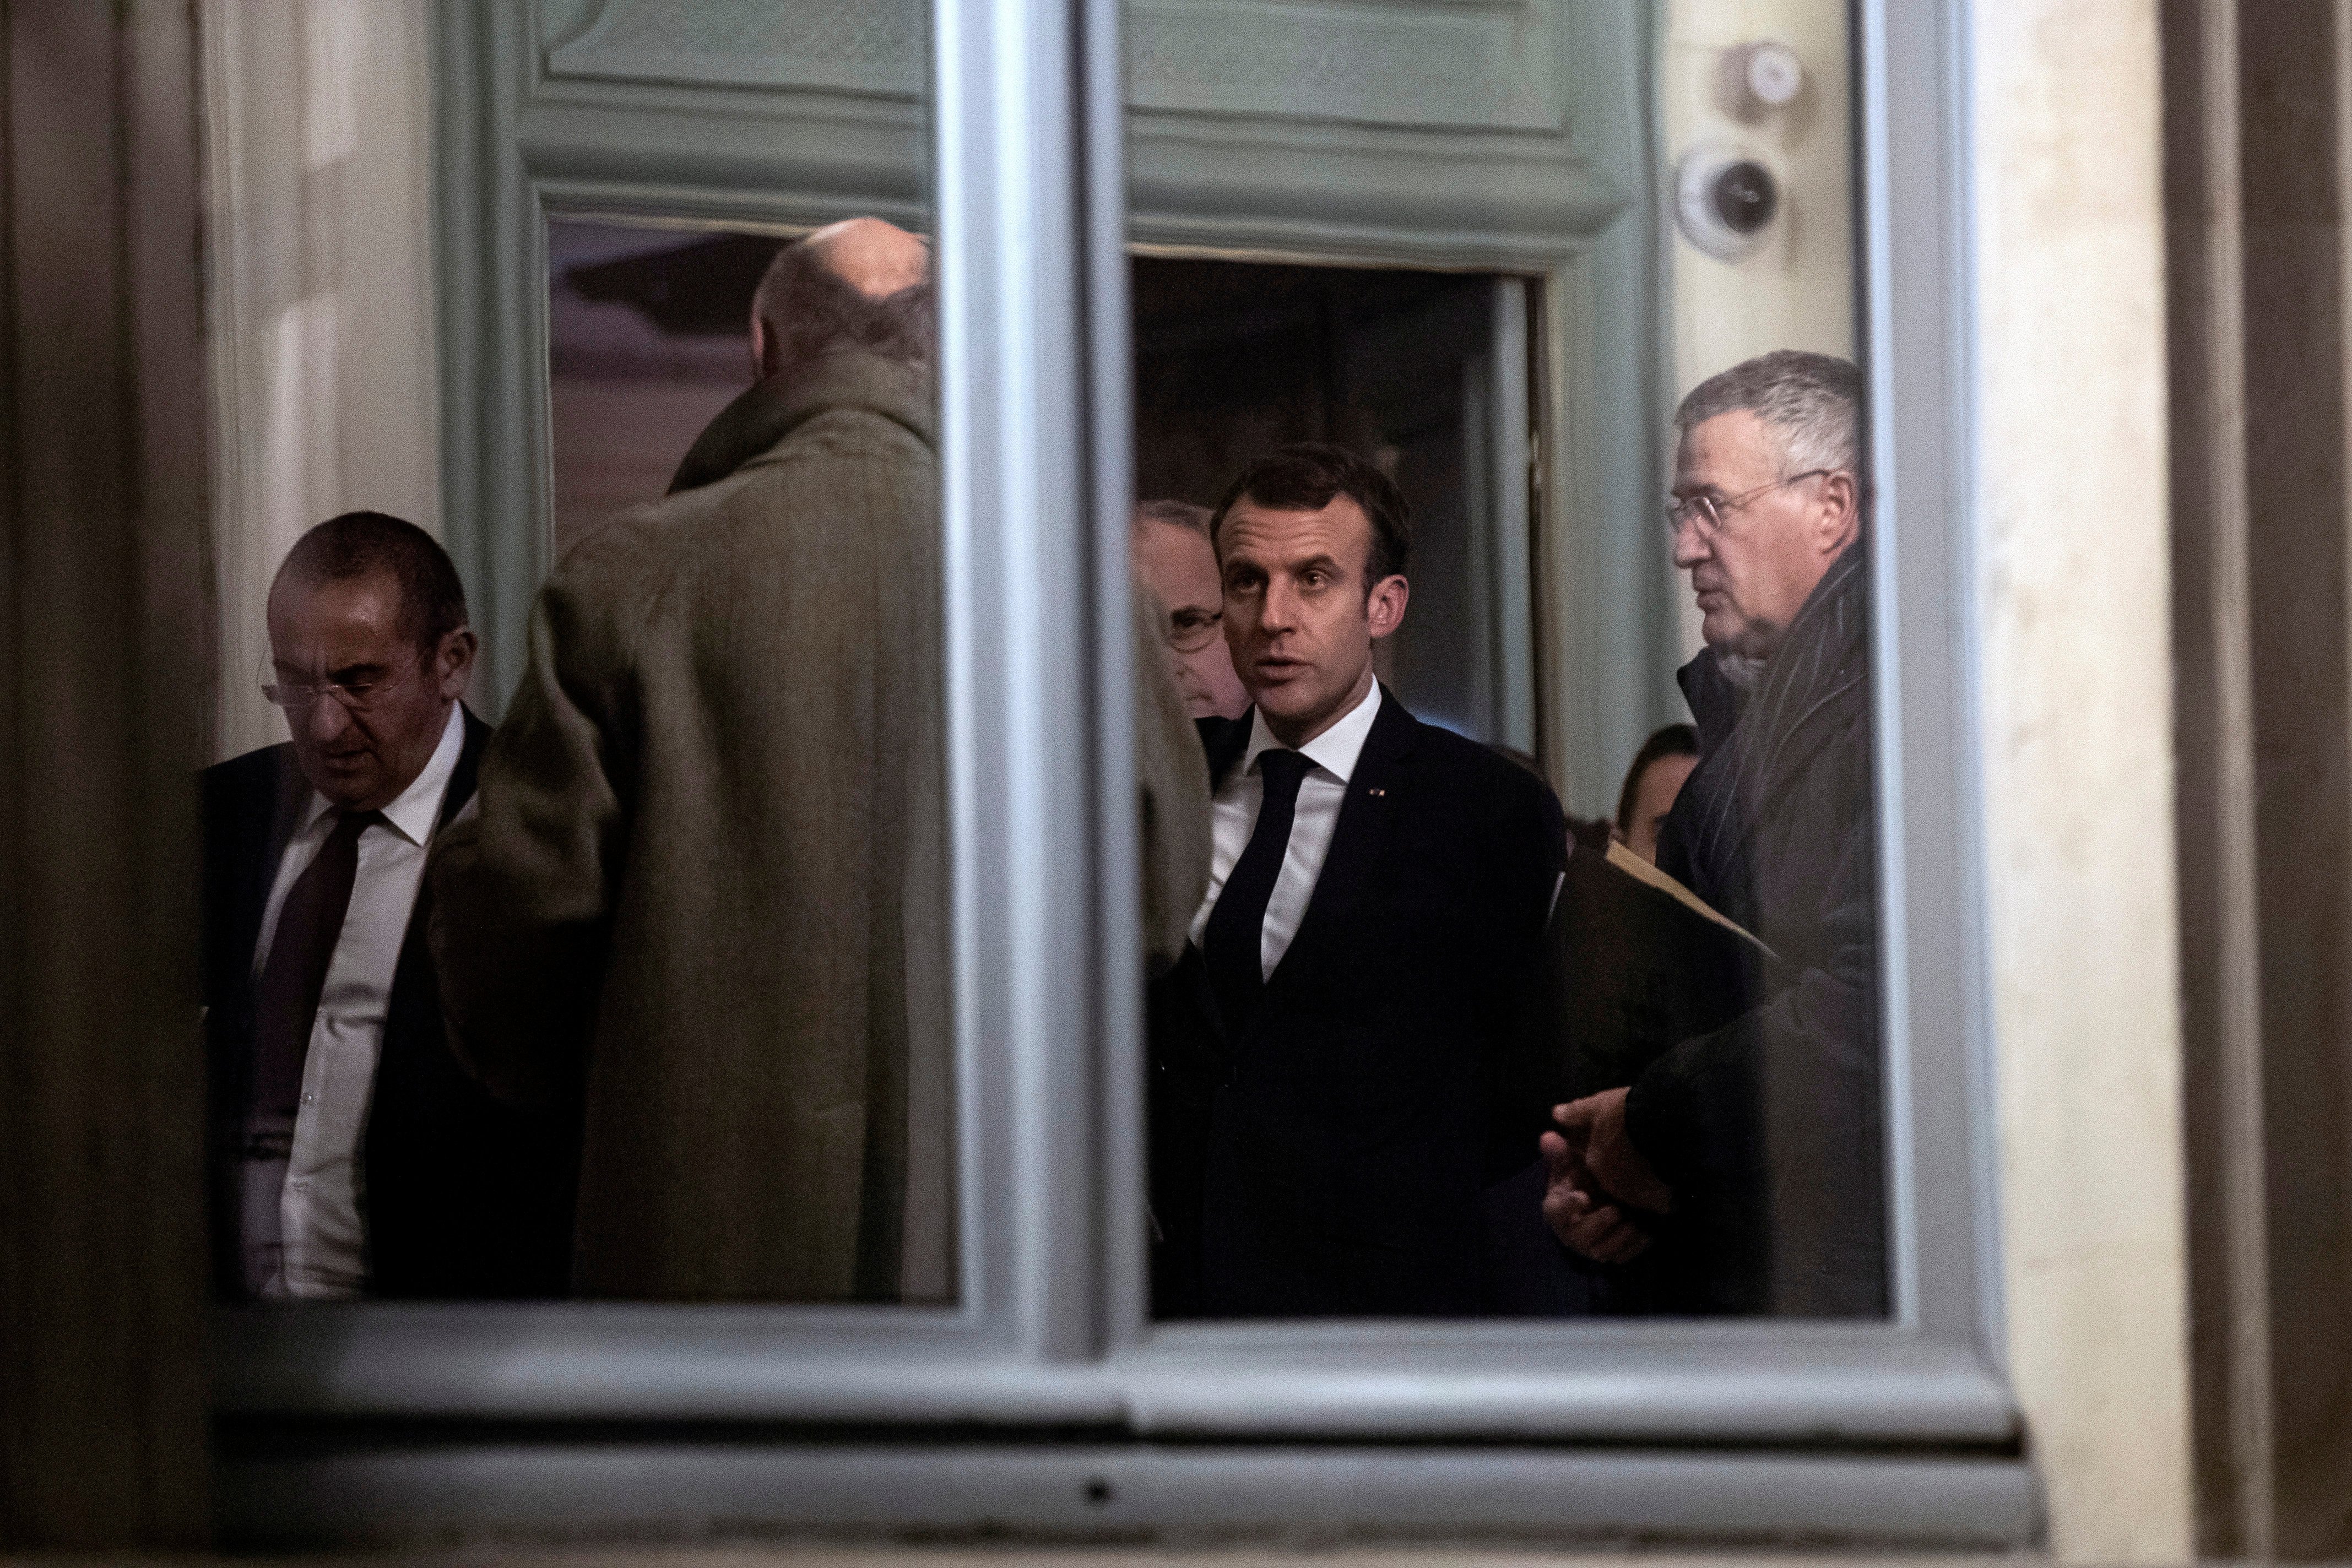 French President Emmanuel Macron (2-R) leaves an emergency meeting at the Interior Ministry in Paris, France, late 11 December 2018. (ETIENNE LAURENT / POOL via REUTERS )